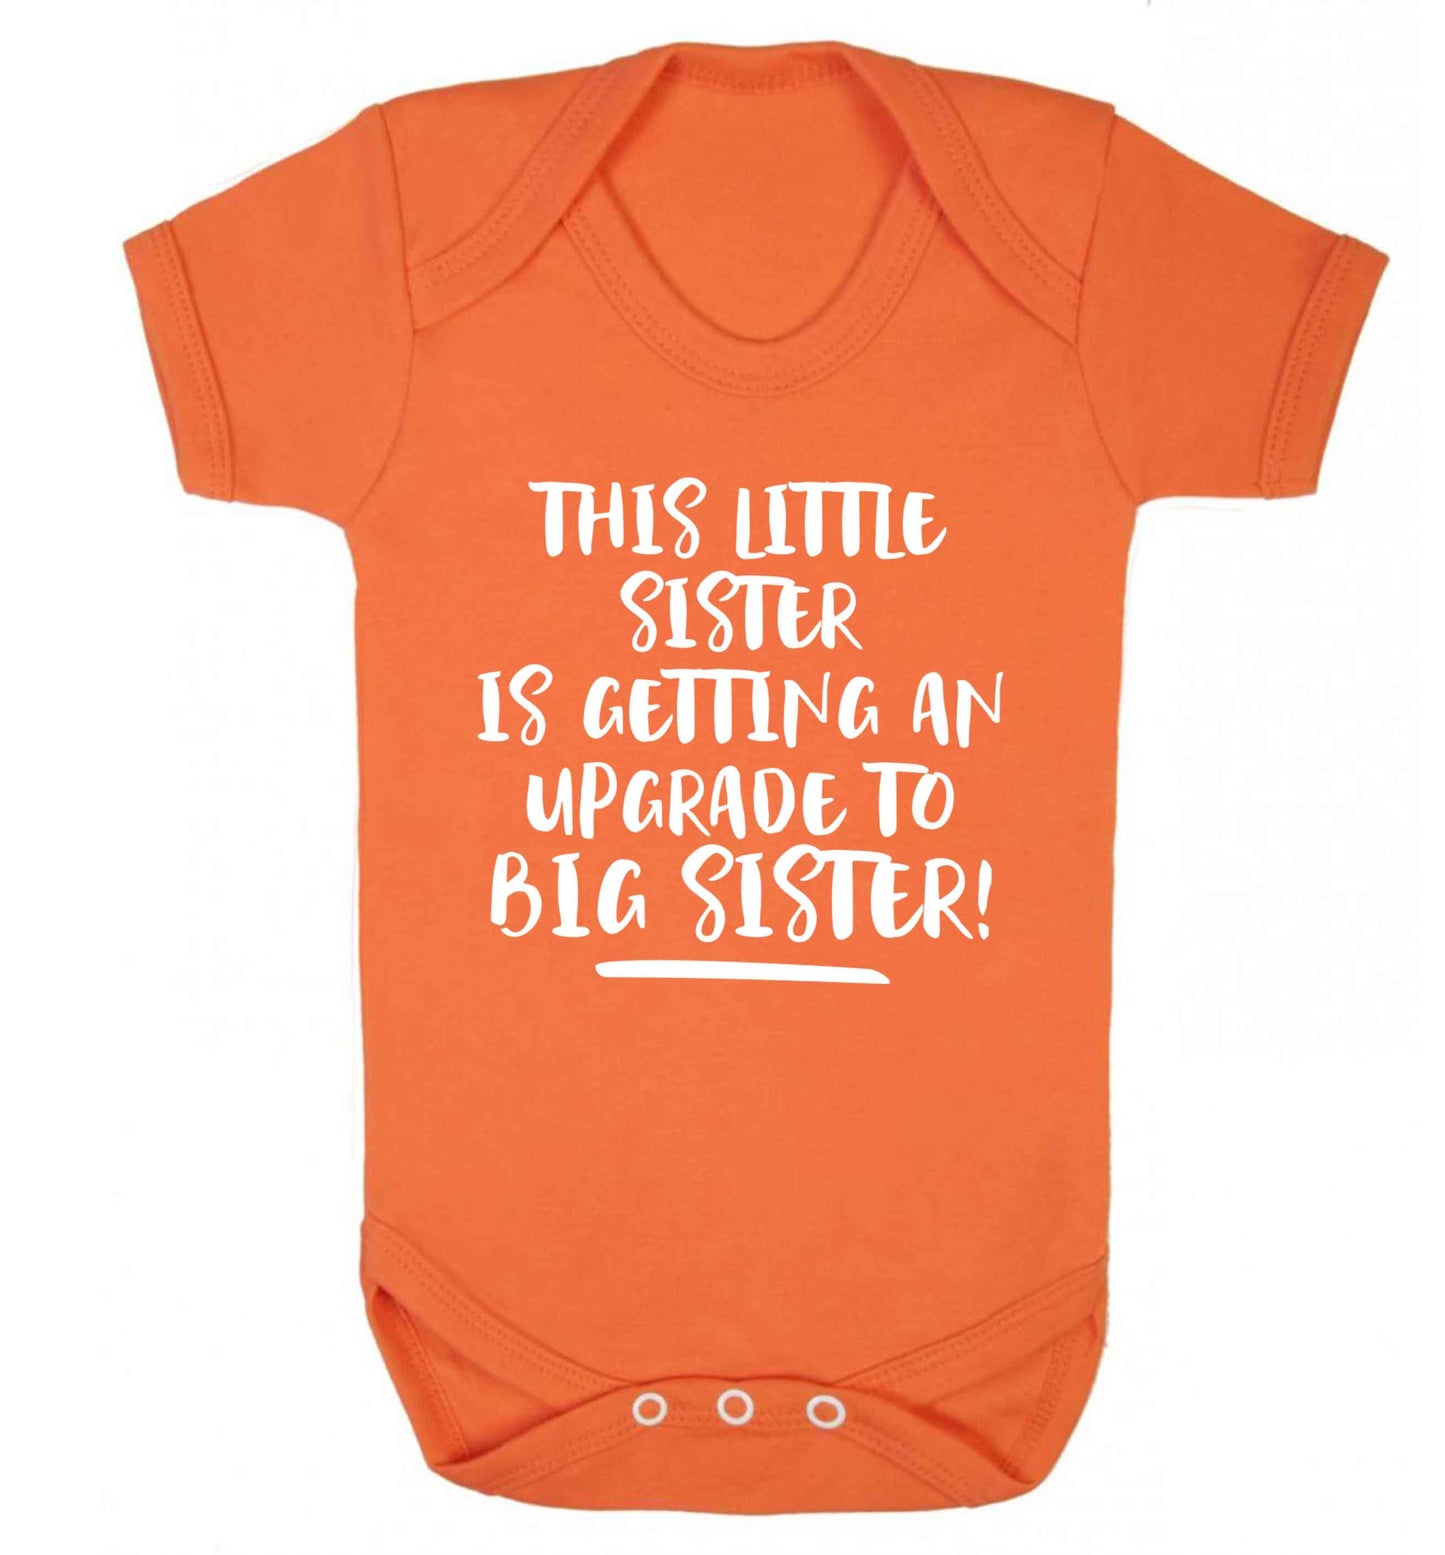 This little sister is getting an upgrade to big sister! Baby Vest orange 18-24 months